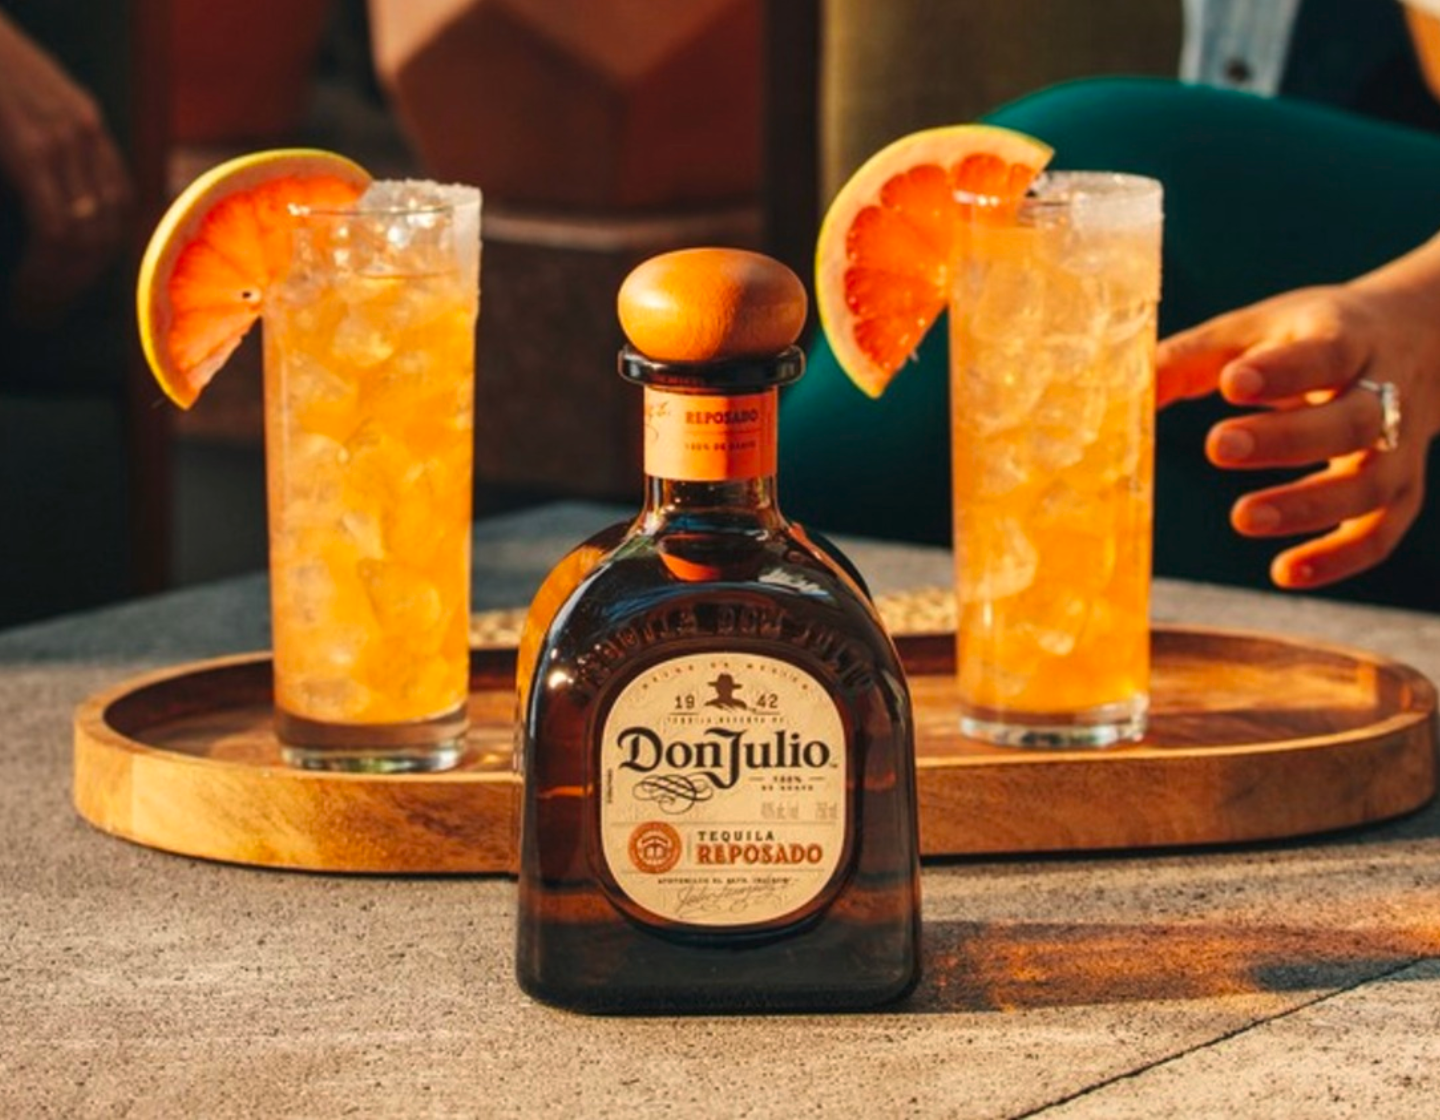 Bottle of Don Julio Reposado tequila in front of tray of two orange cocktails